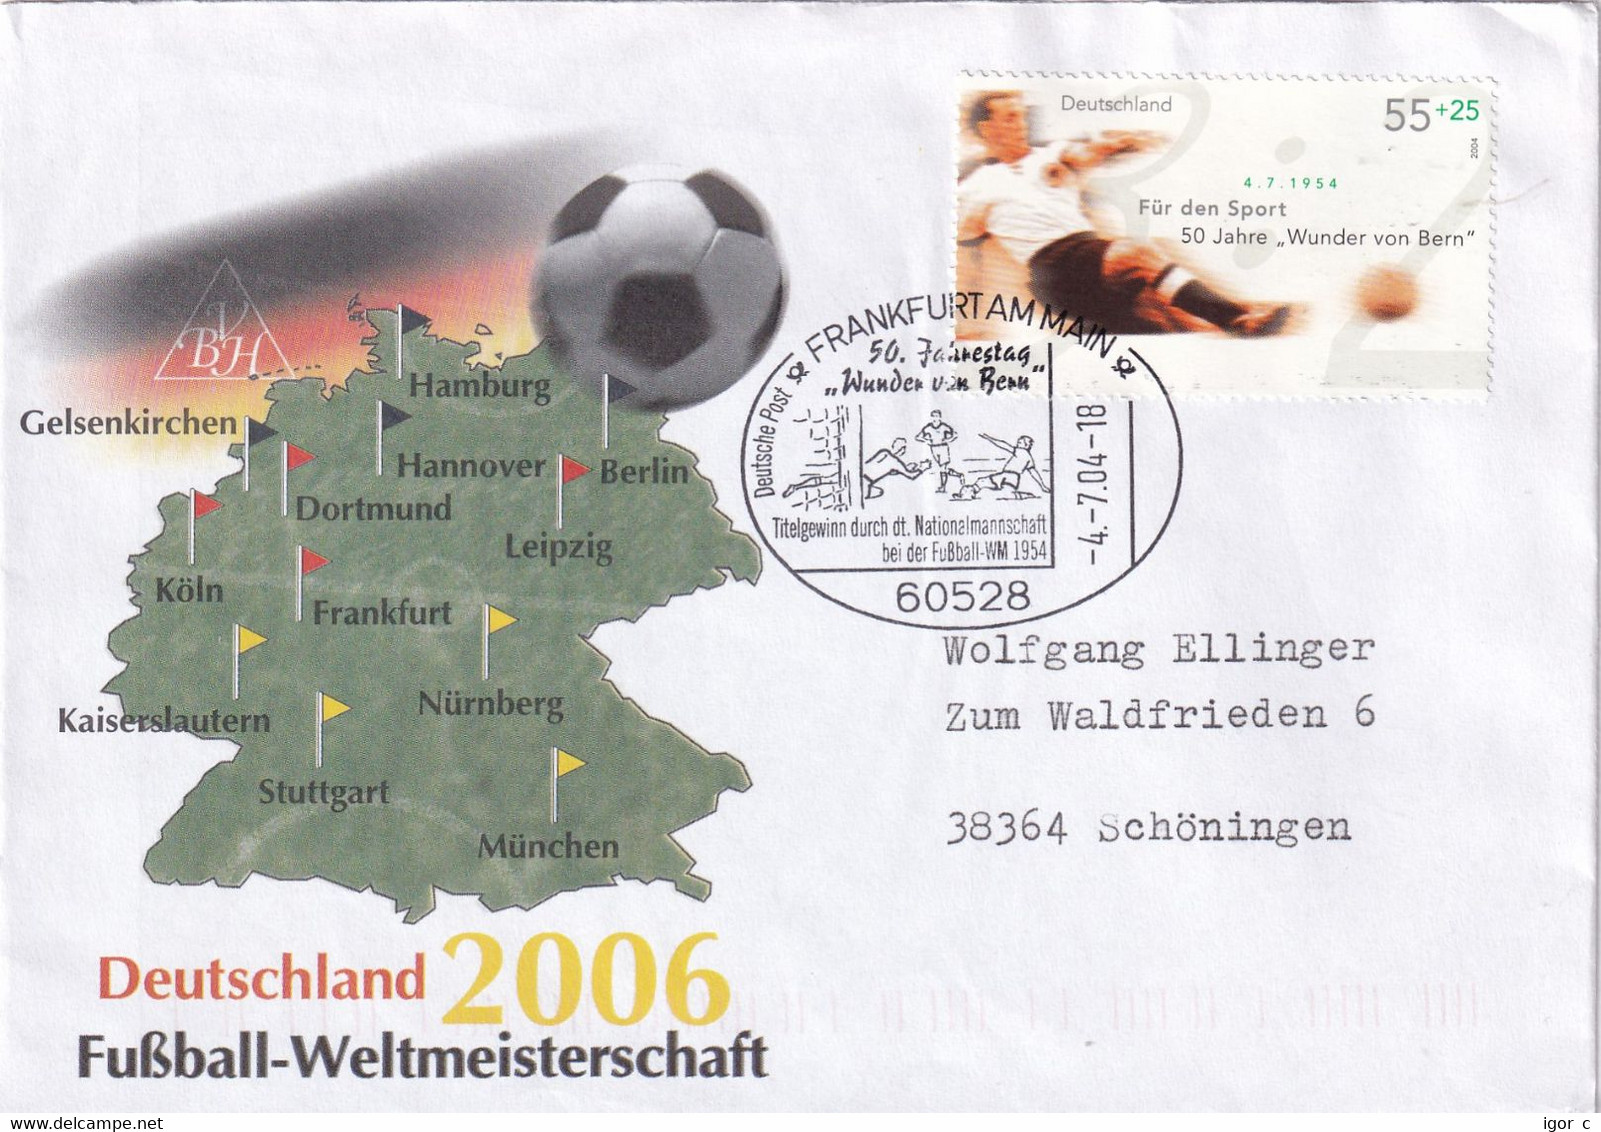 Germany 2004 Cover; Football Fussball Soccer Calcio: FIFA World Cup 1954: 50 Jahre Wunder Von Bern; 2006 Host Cities - 1954 – Suiza